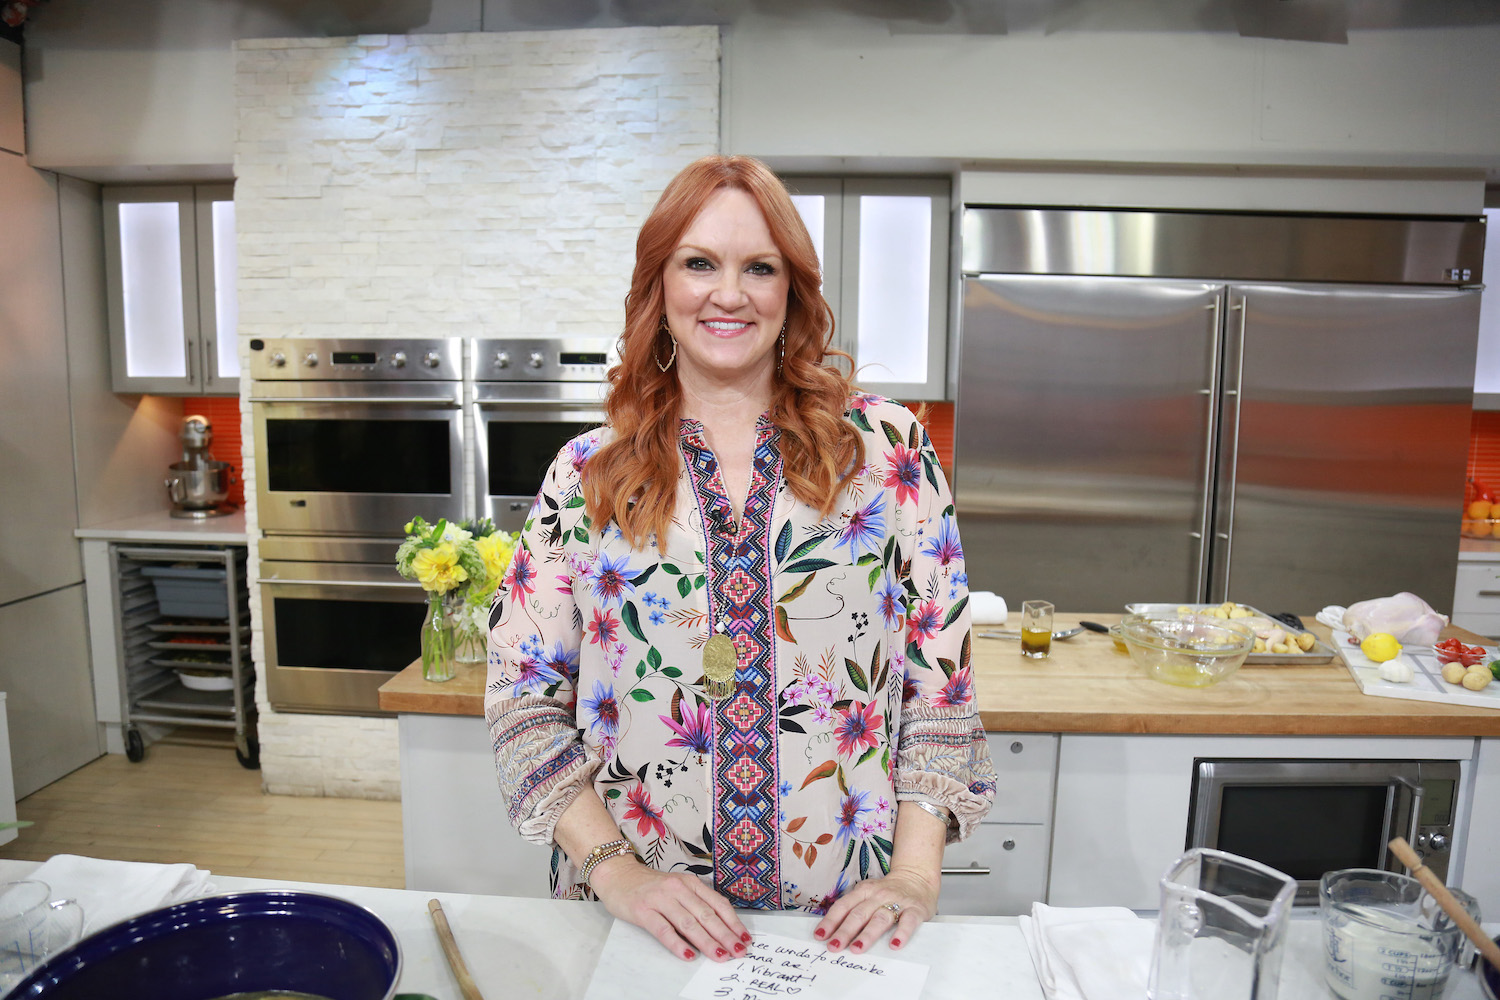 Ree Drummond smiles while wearing a brightly colored top on the set of the 'Today' show in 2019